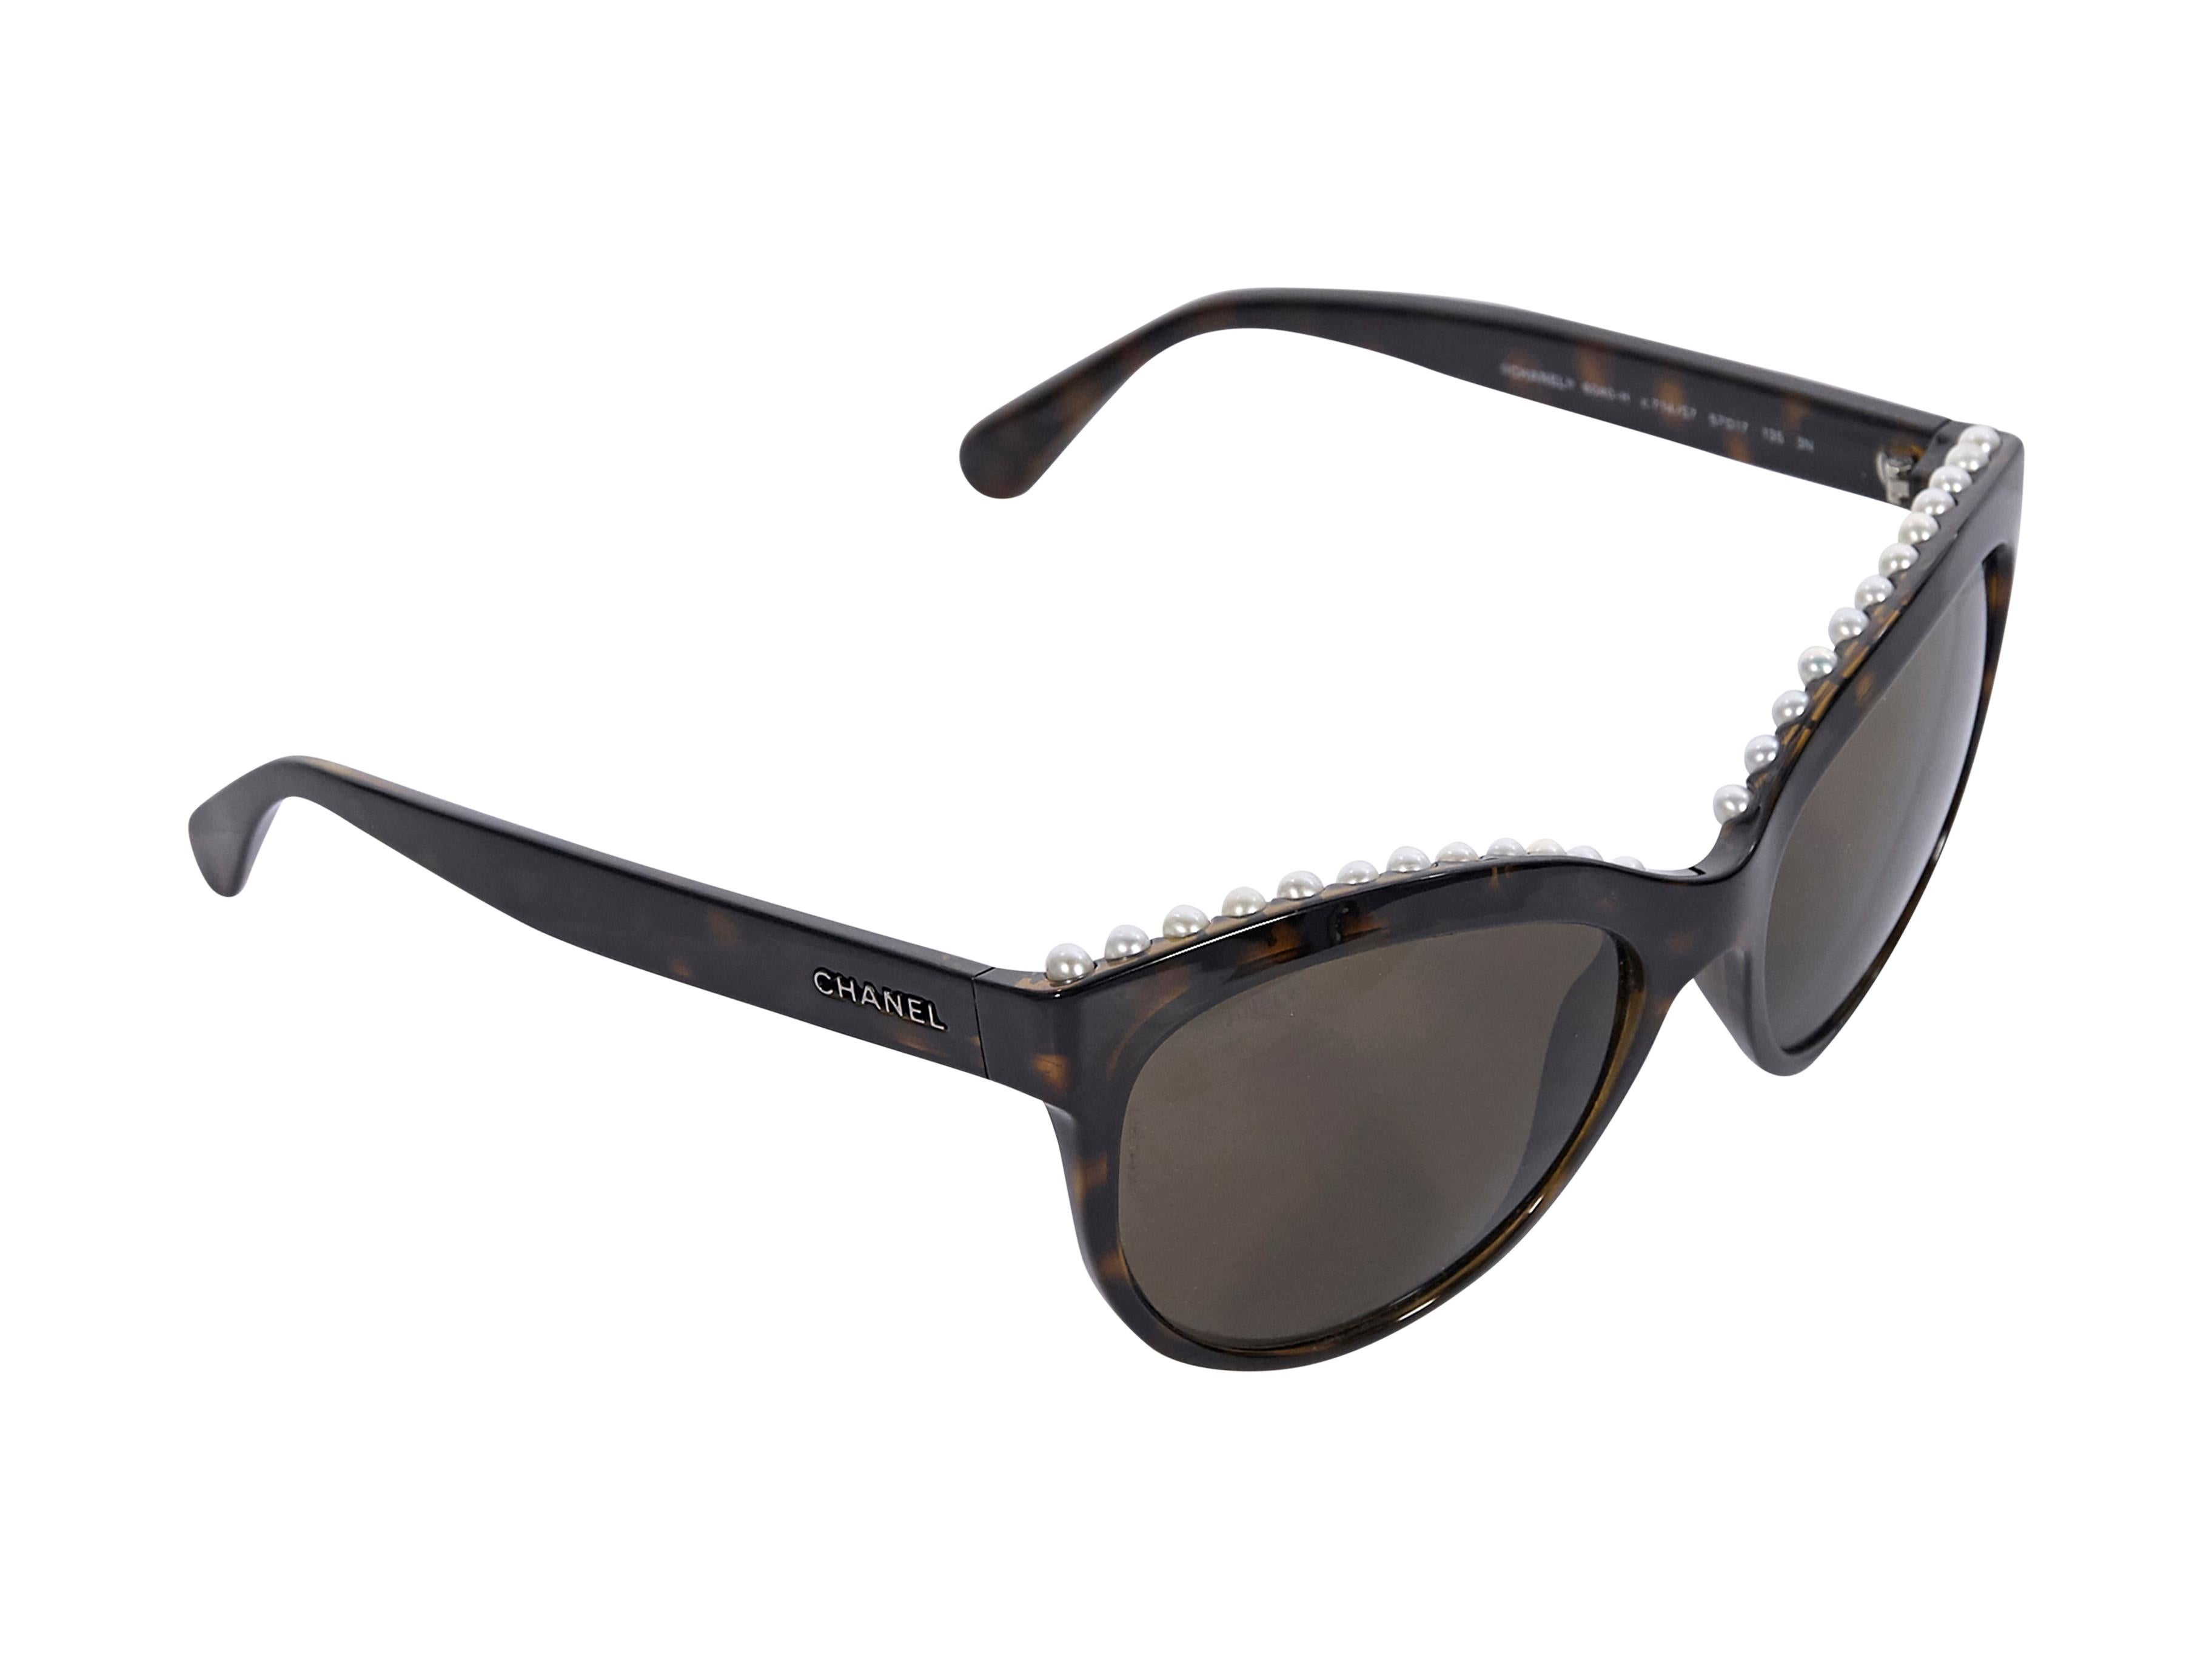 Product details:  Brown tortoiseshell cat-eye sunglasses by Chanel.  Trimmed with faux pearls.  Logo detail at temples.  2.5